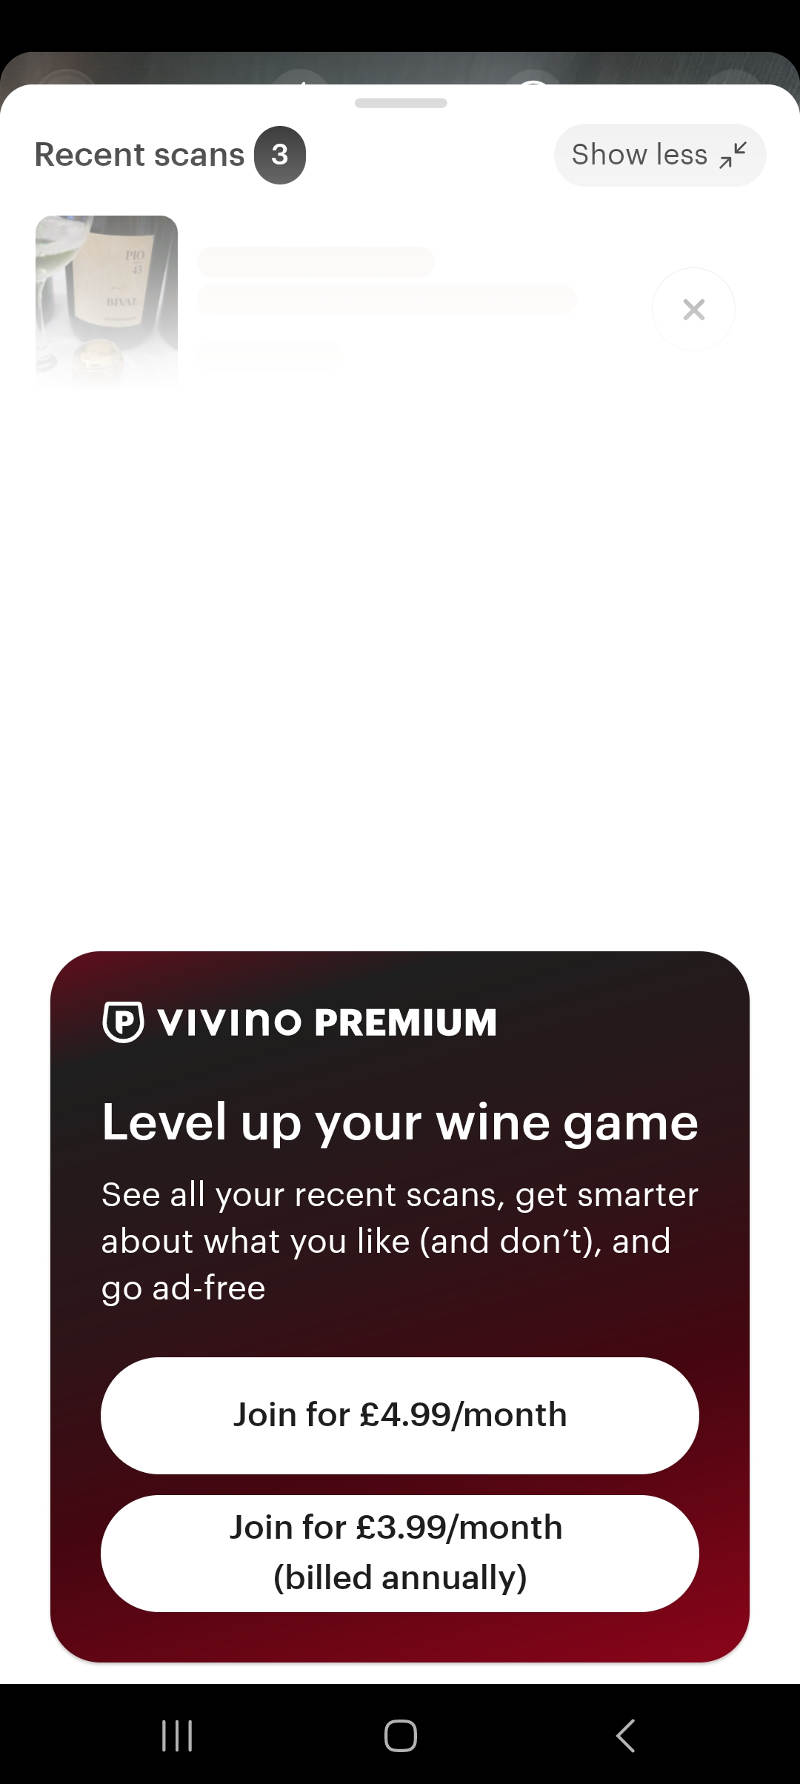 As a Professional Wine Reviewer Vivino